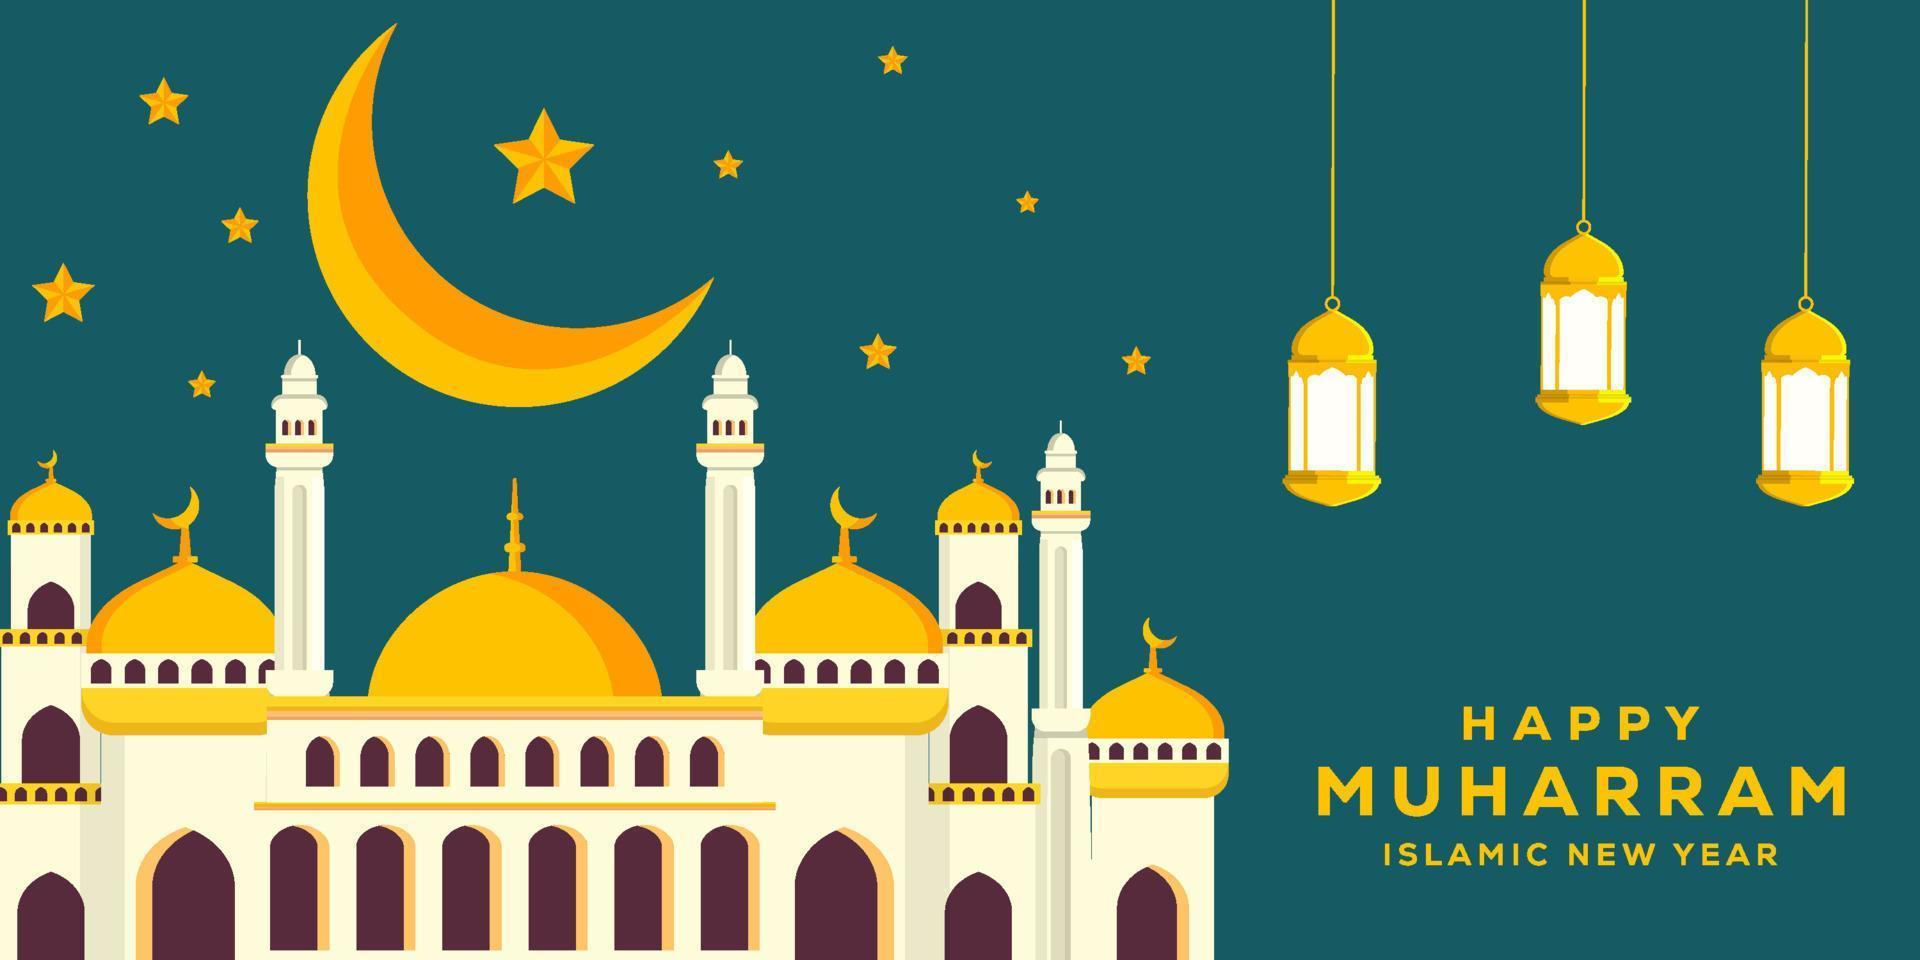 flat happy muharram and islamic new year background illustration with mosque, moon, and stars vector